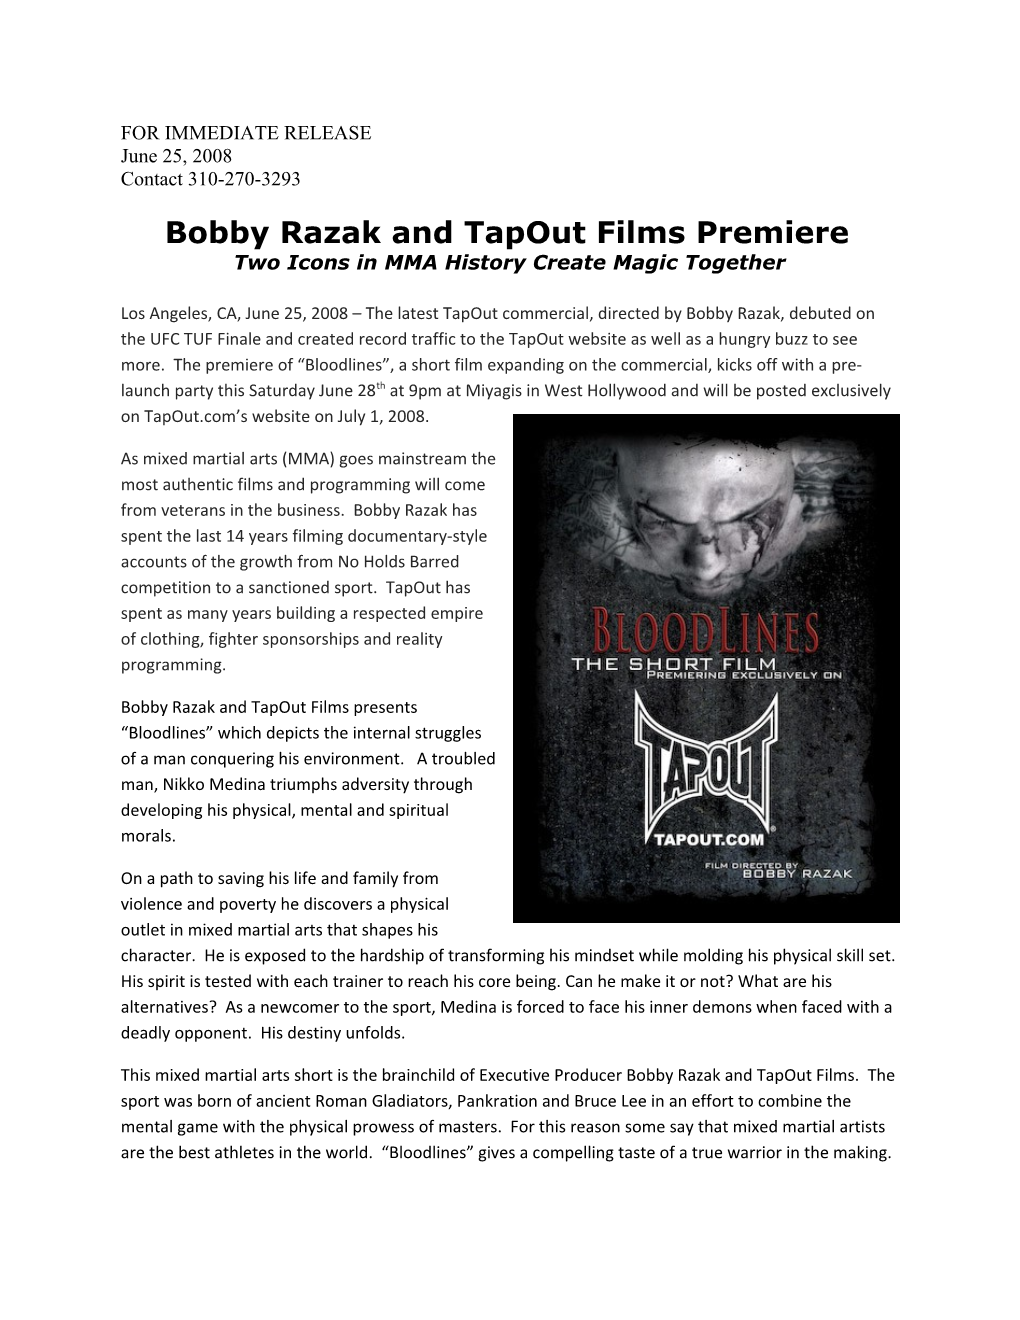 Bobby Razak and Tapout Films Premiere Two Icons in MMA History Create Magic Together